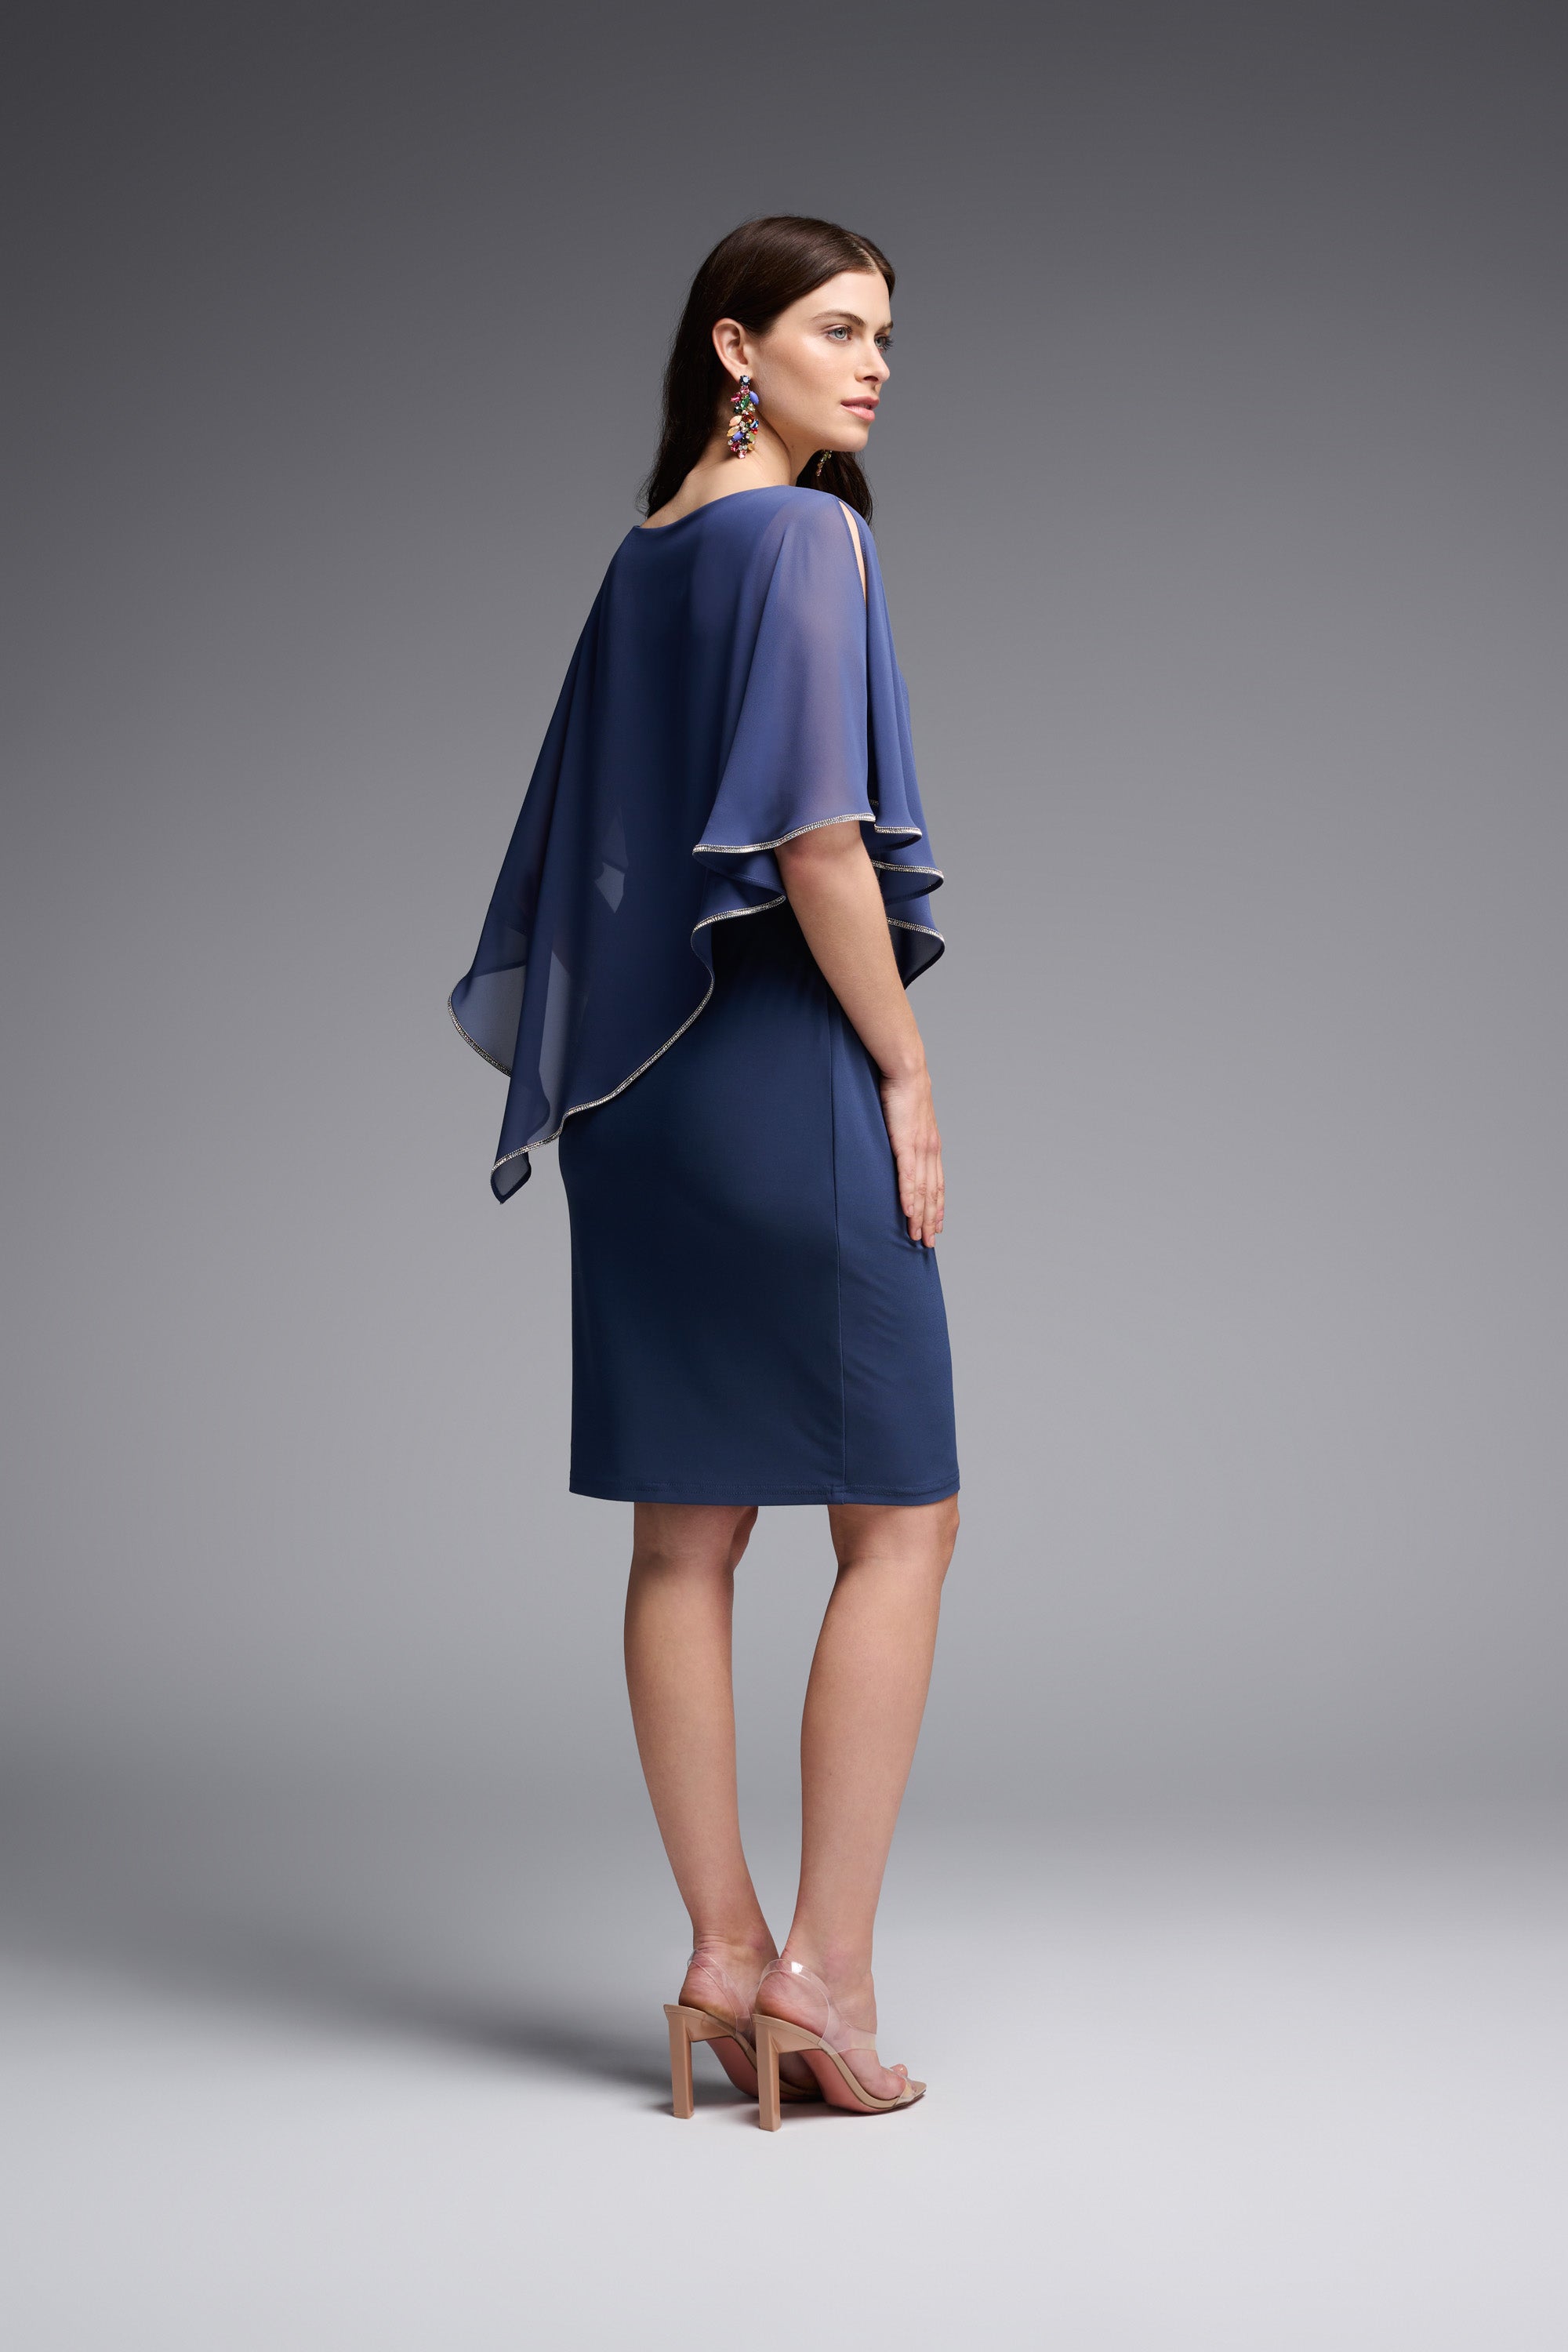 Layered Dress With Cape Overlay in Mineral Blue 223762 - After Hours Boutique